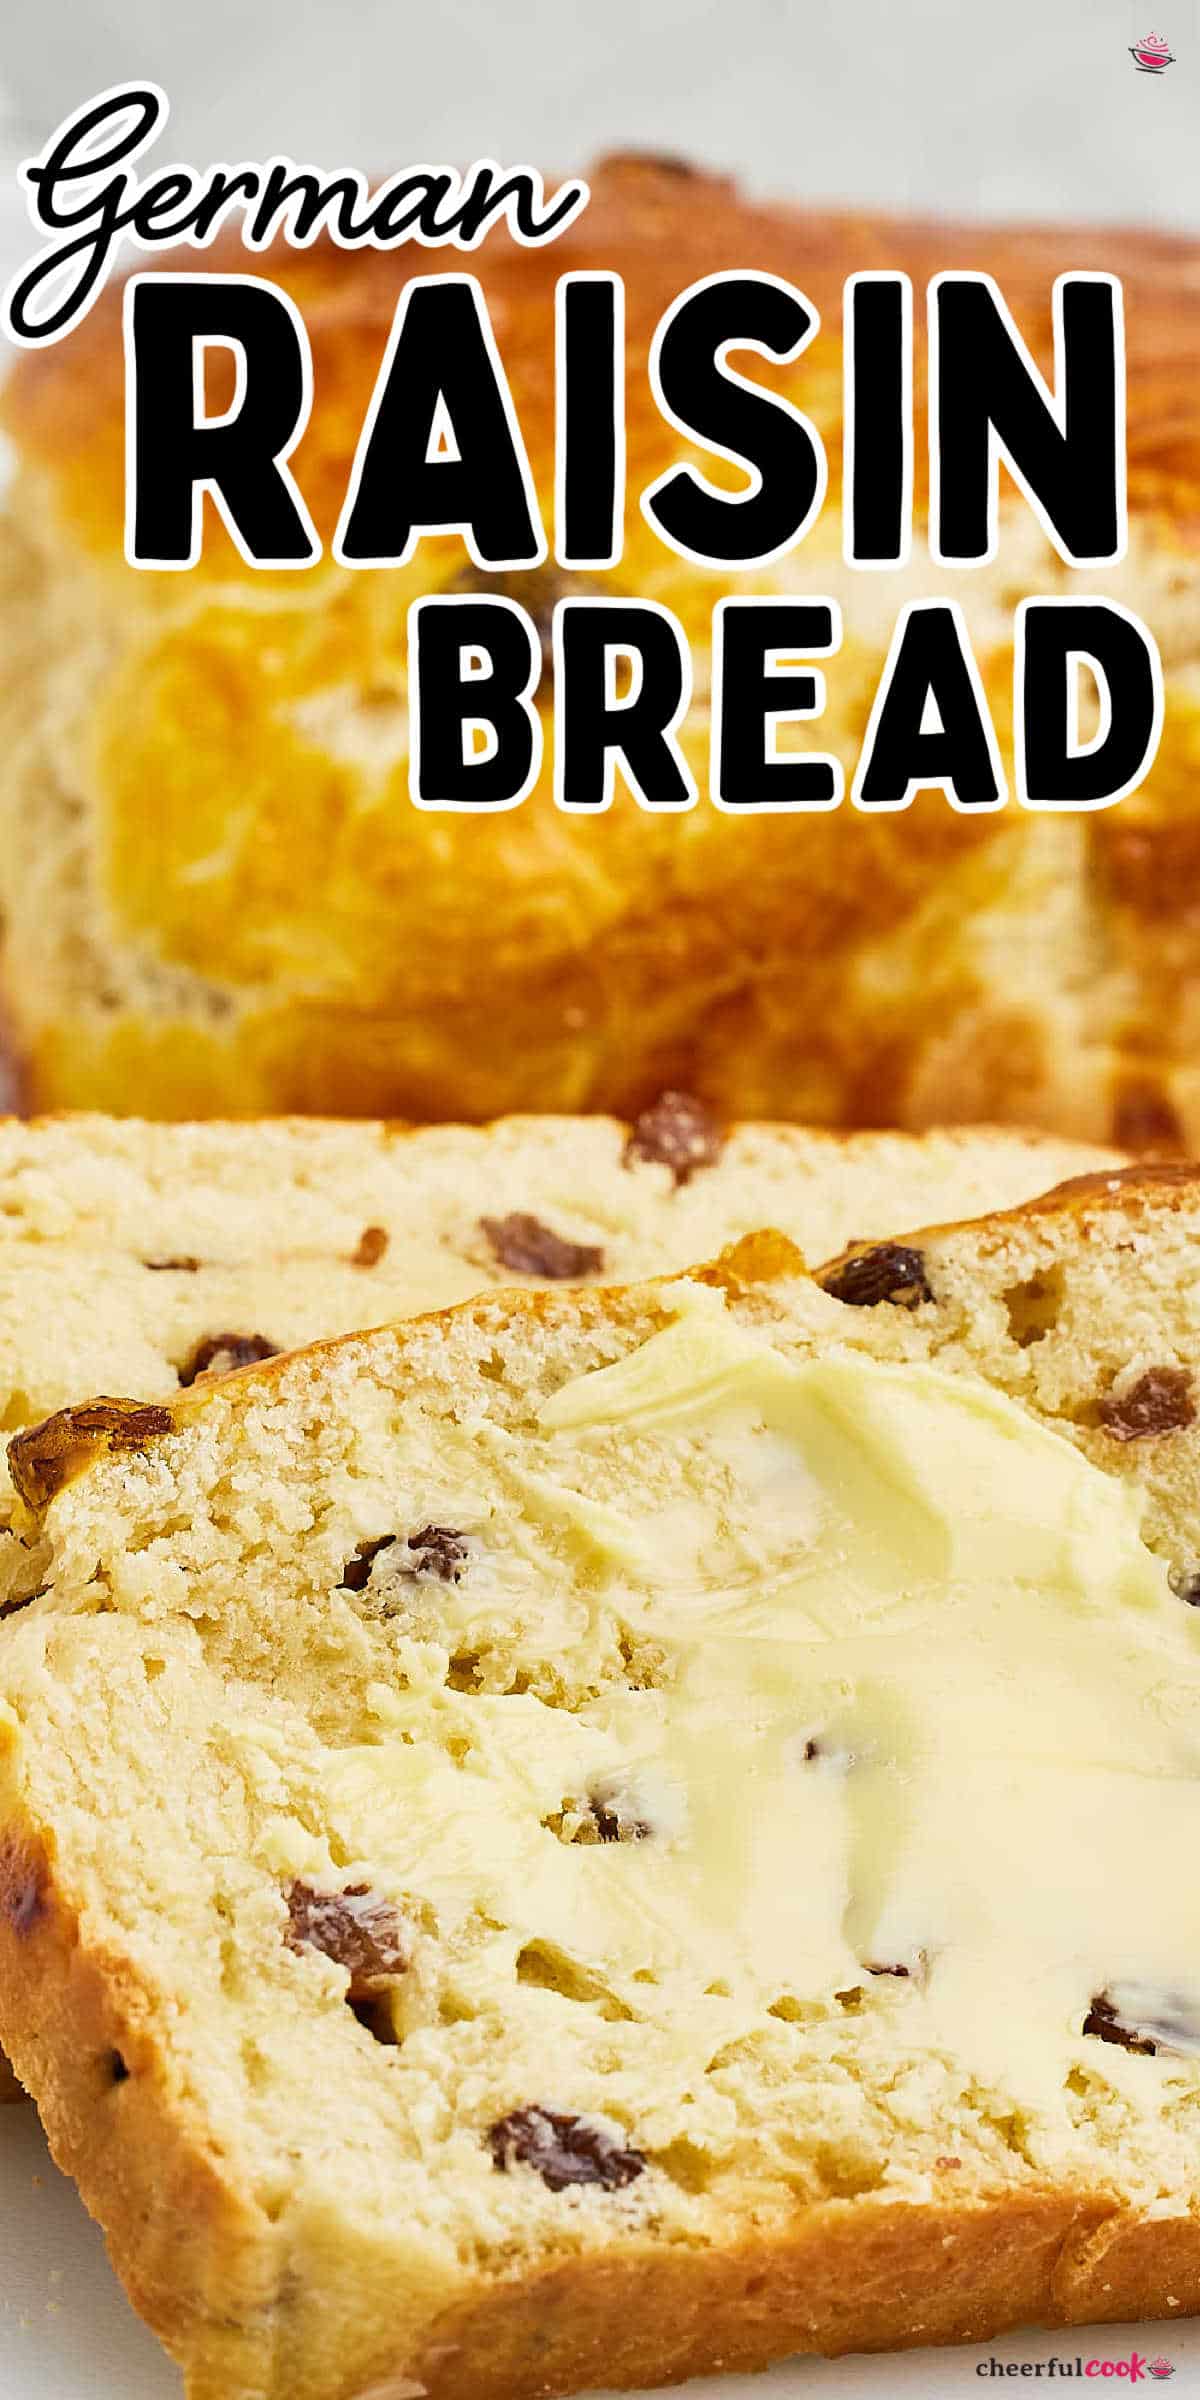 Indulge in the inviting aroma of homemade Raisin Bread - warm, fluffy, and tender. This scrumptious treat is surprisingly easy to make using a few simple ingredients! Start the day with a slice or enjoy a slice as a delicious midday treat. #cheerfulcook #raisinbread #homemadebread #easybaking #yeast  via @cheerfulcook